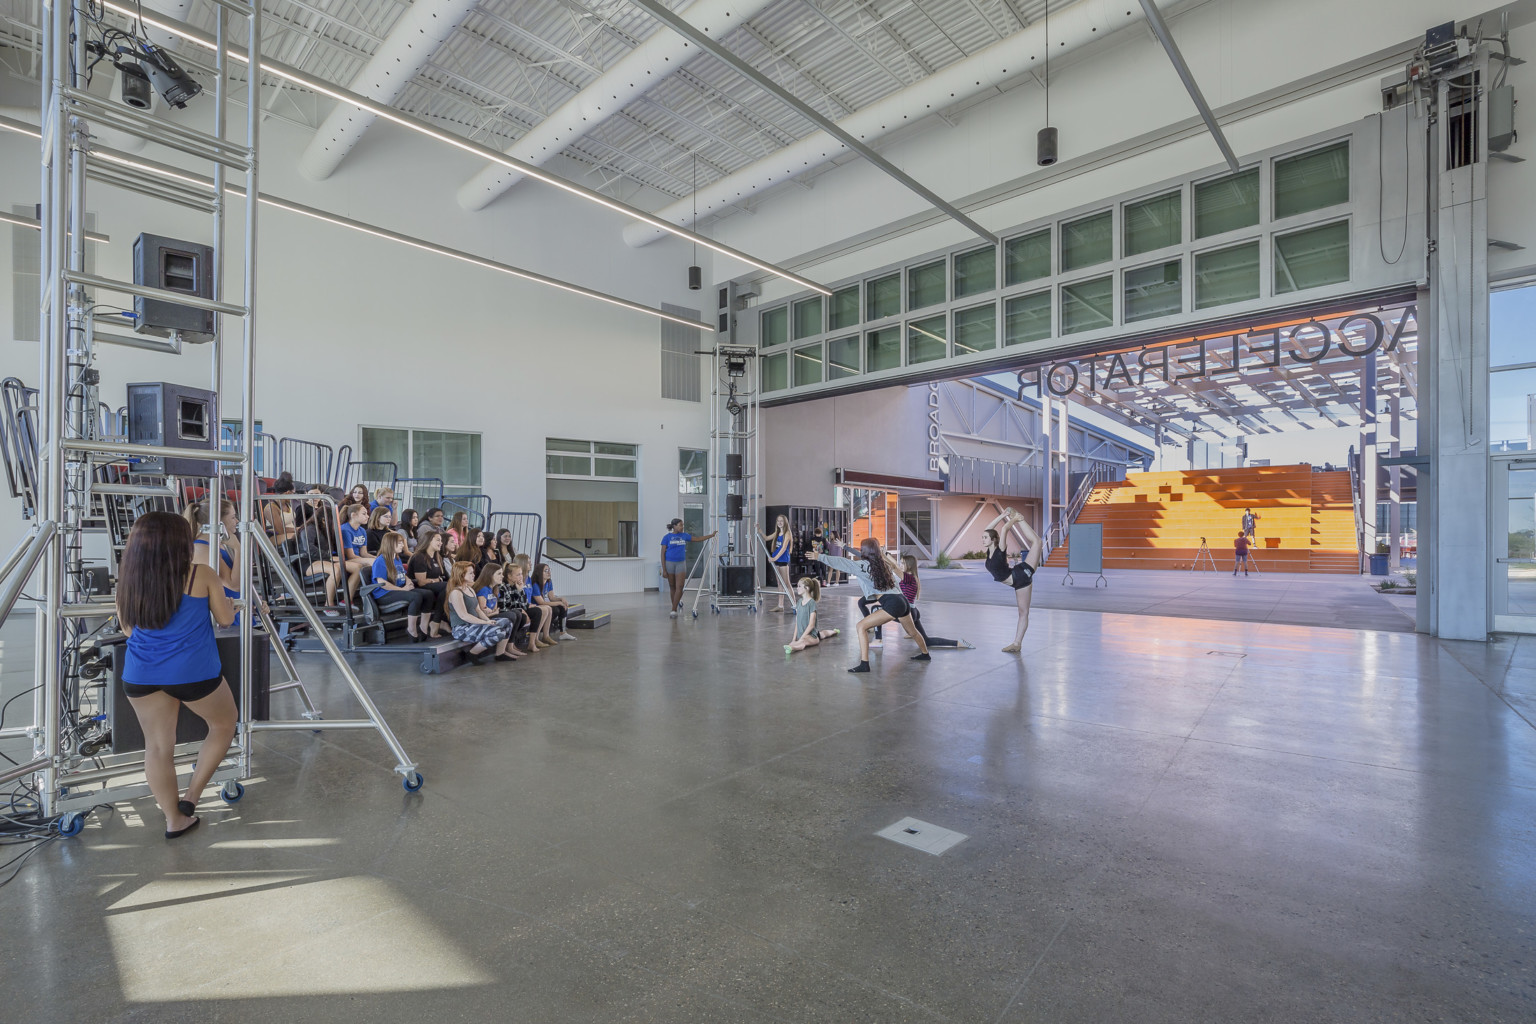 A white room, with the wall opened facing orange stairs, has portable bleachers and equipment